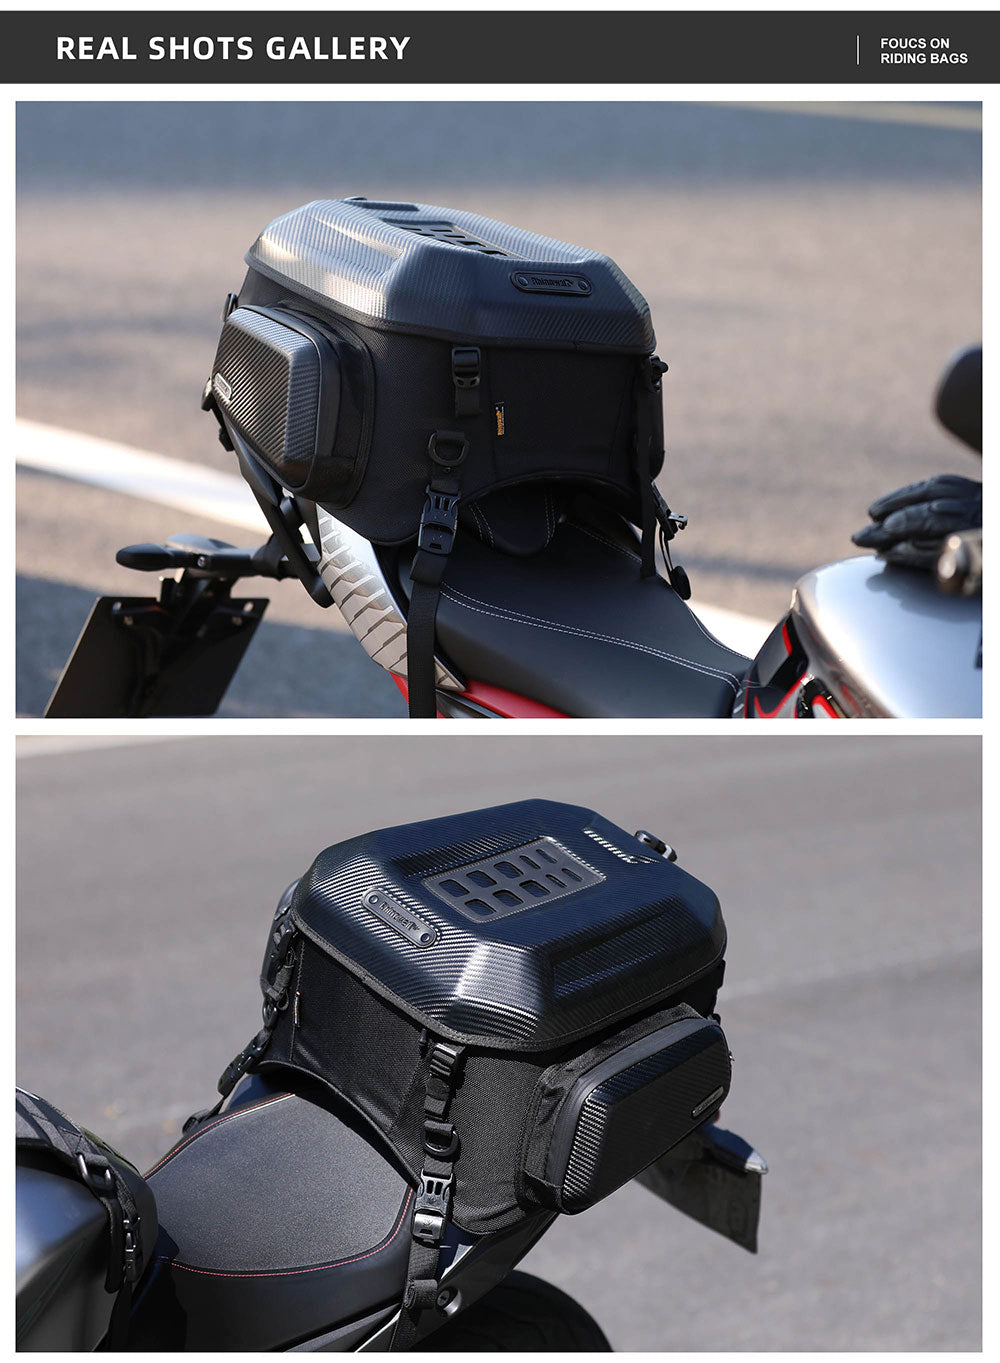 23L-35L Hard Shell Tail  Bag with Expandable